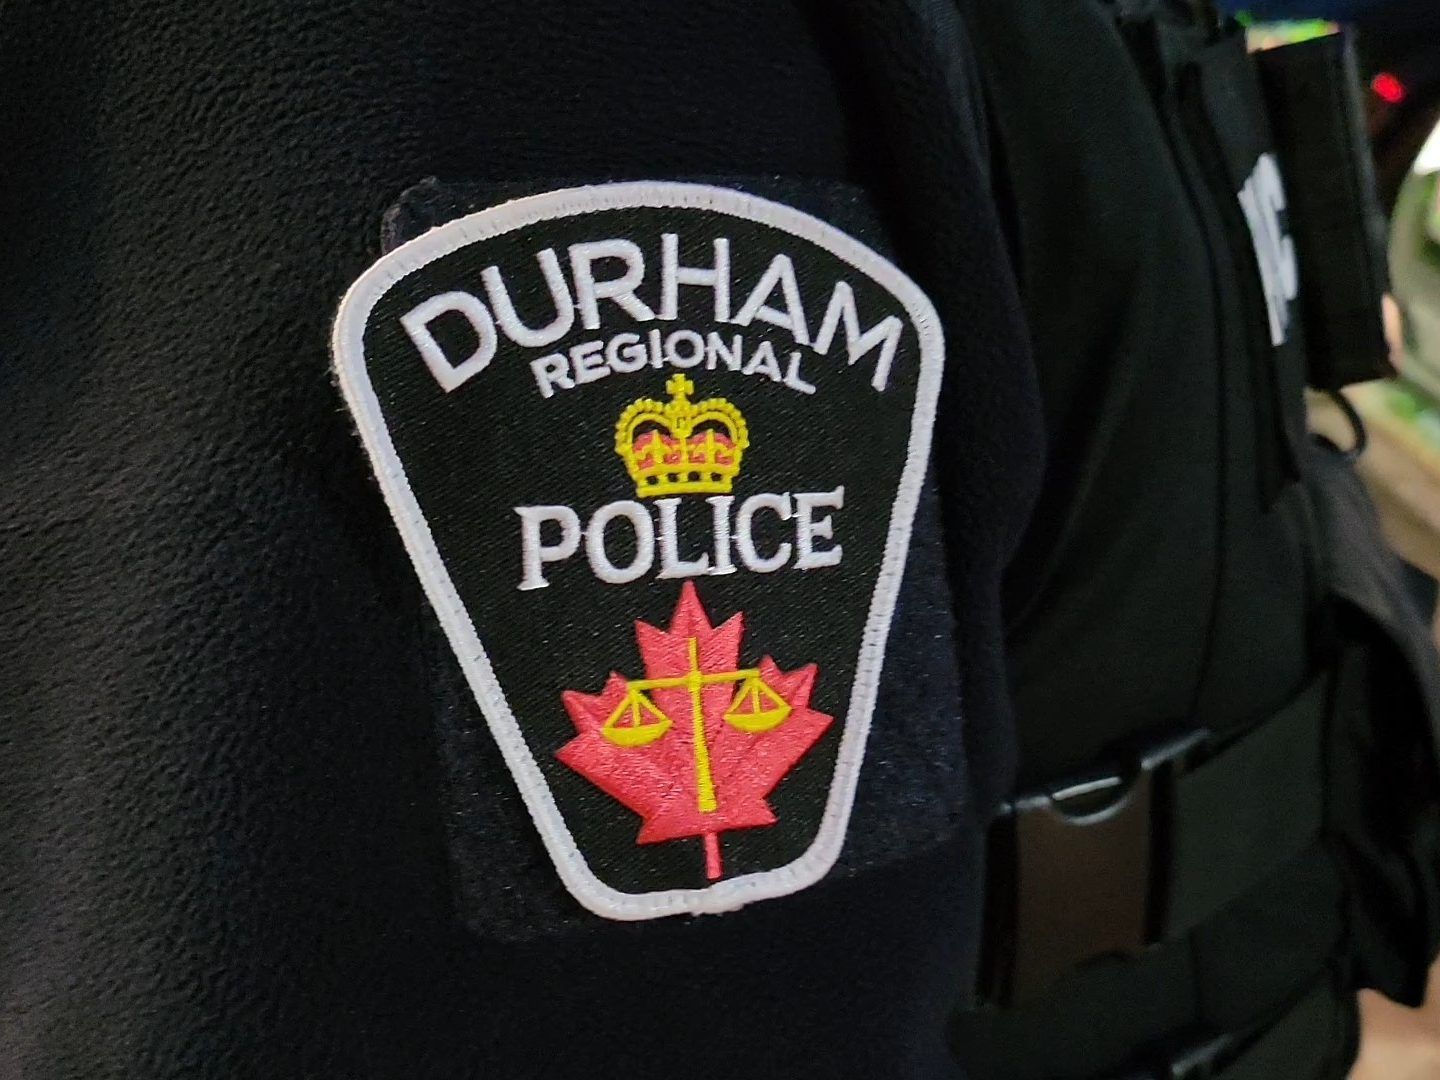 Whitby man, 21, accused of robbing sex workers in Ajax hotel | Toronto Sun